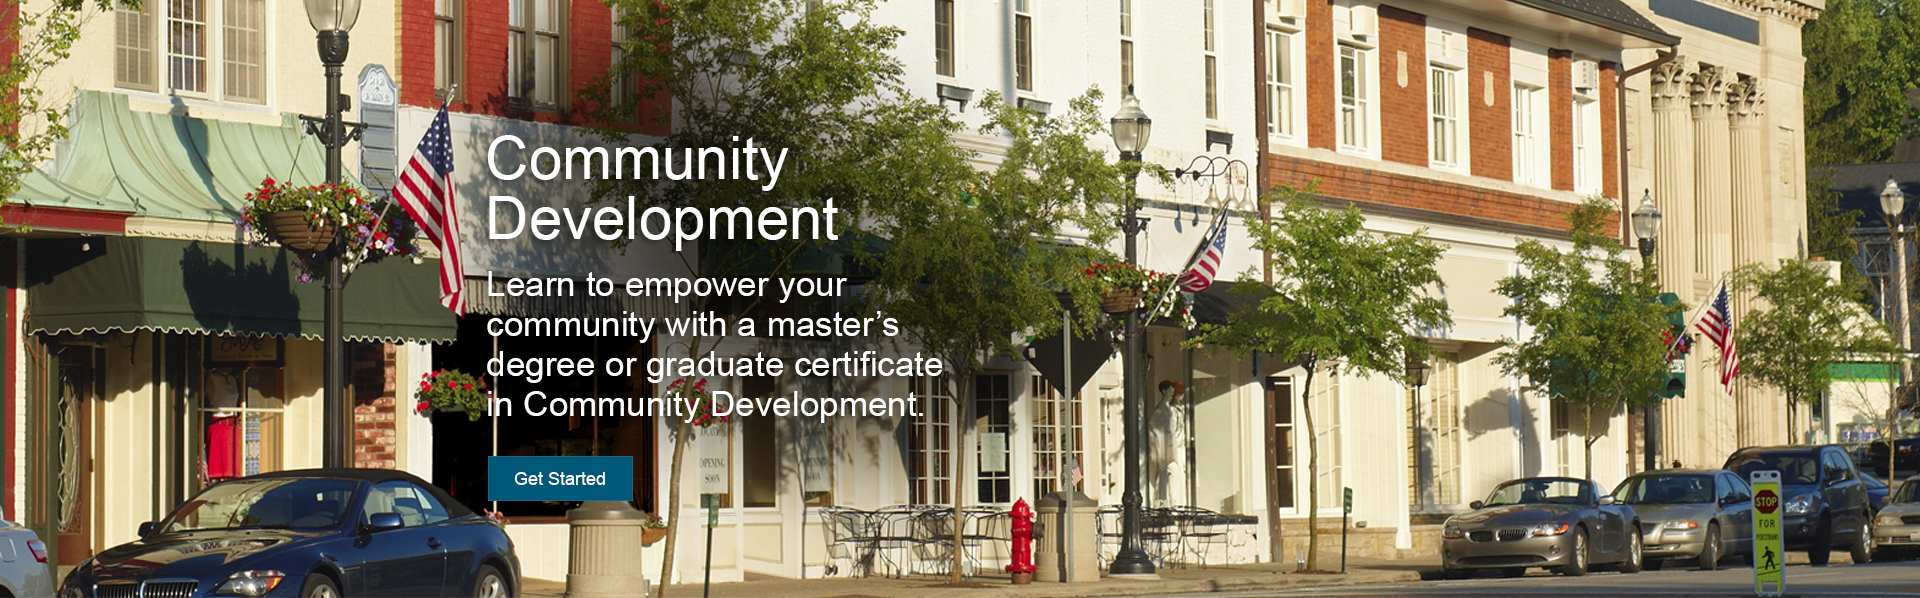 The street-level view of a quiet city block. This online community development master's degree and graduate certificate is for community leaders, practitioners, and those working to help communities.